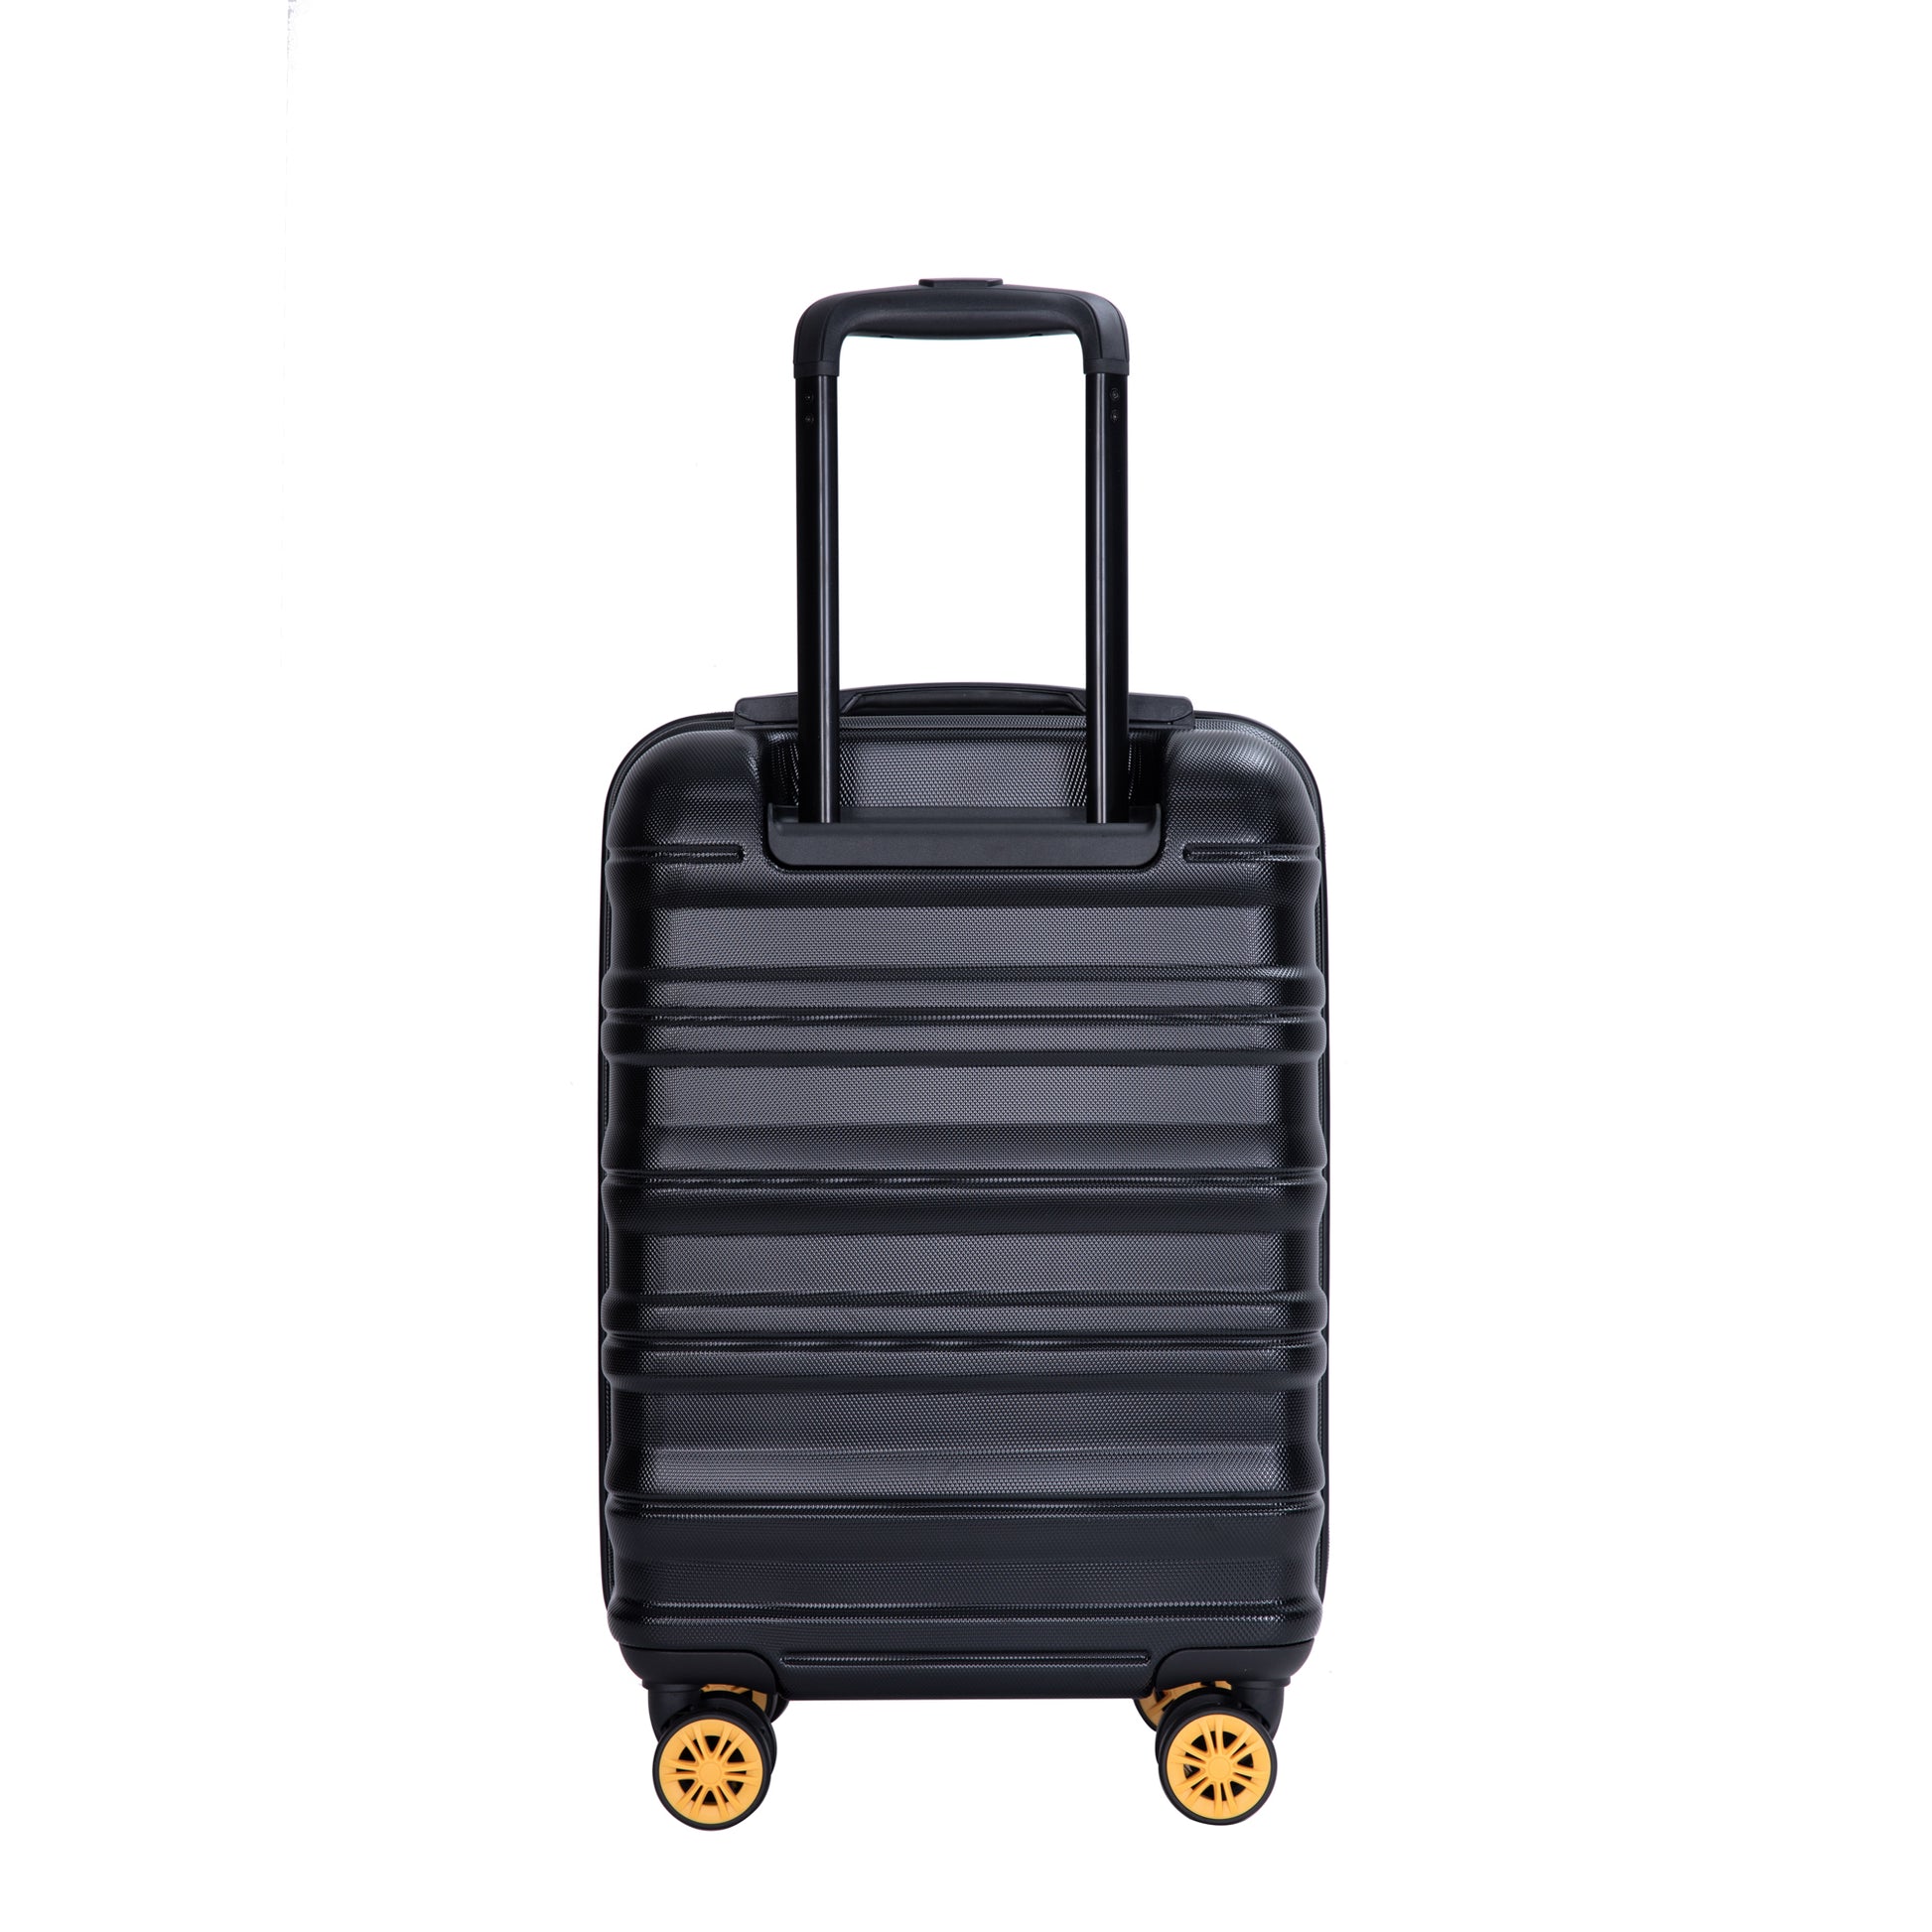 Carry On Luggage Airline Approved18.5" Carry On black-abs